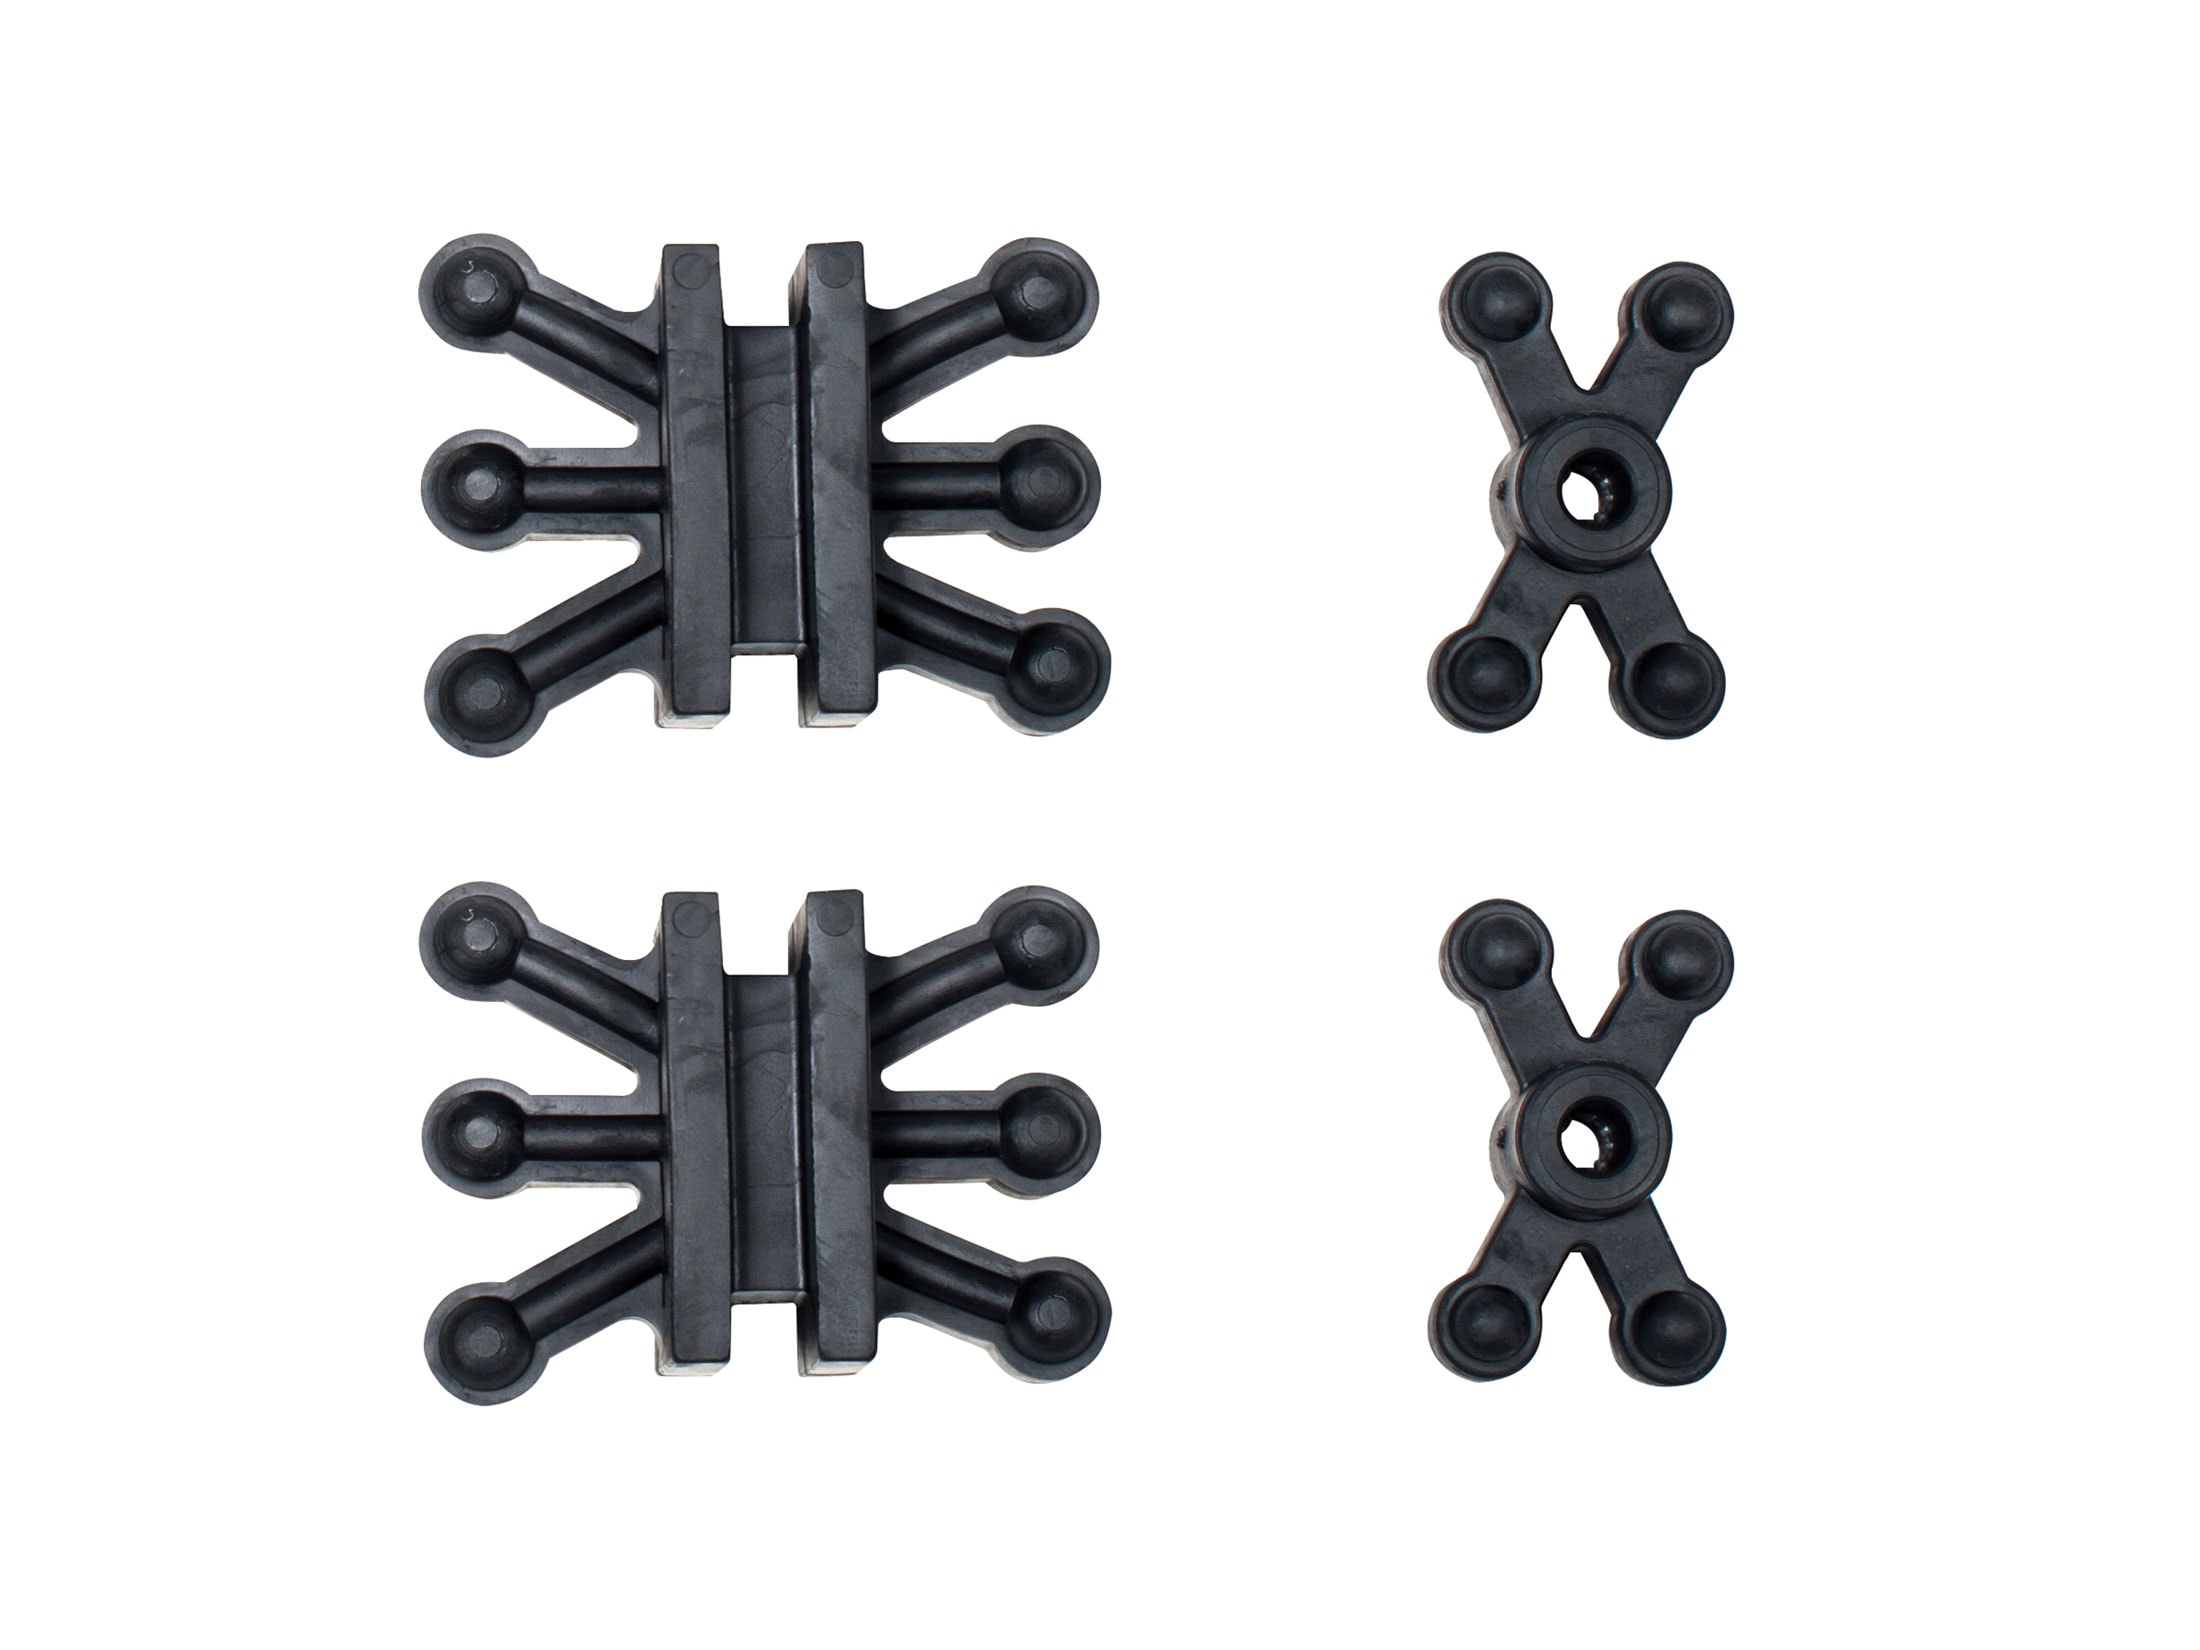 centerpoint crossbow string dampeners